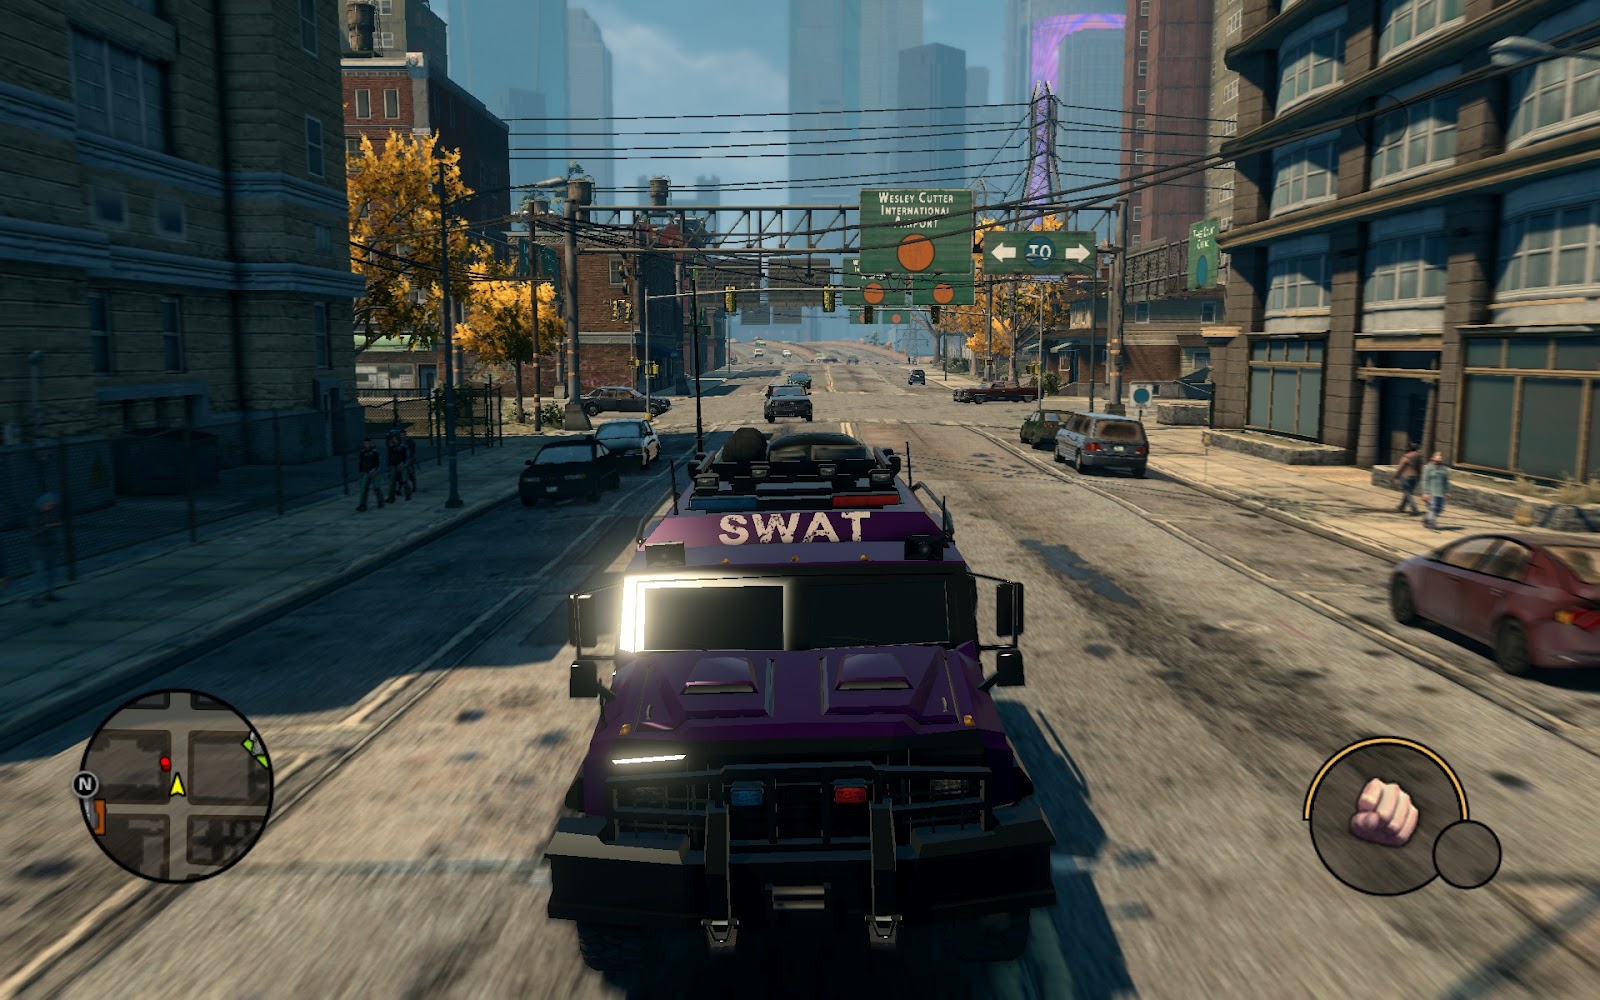 download saints row the third